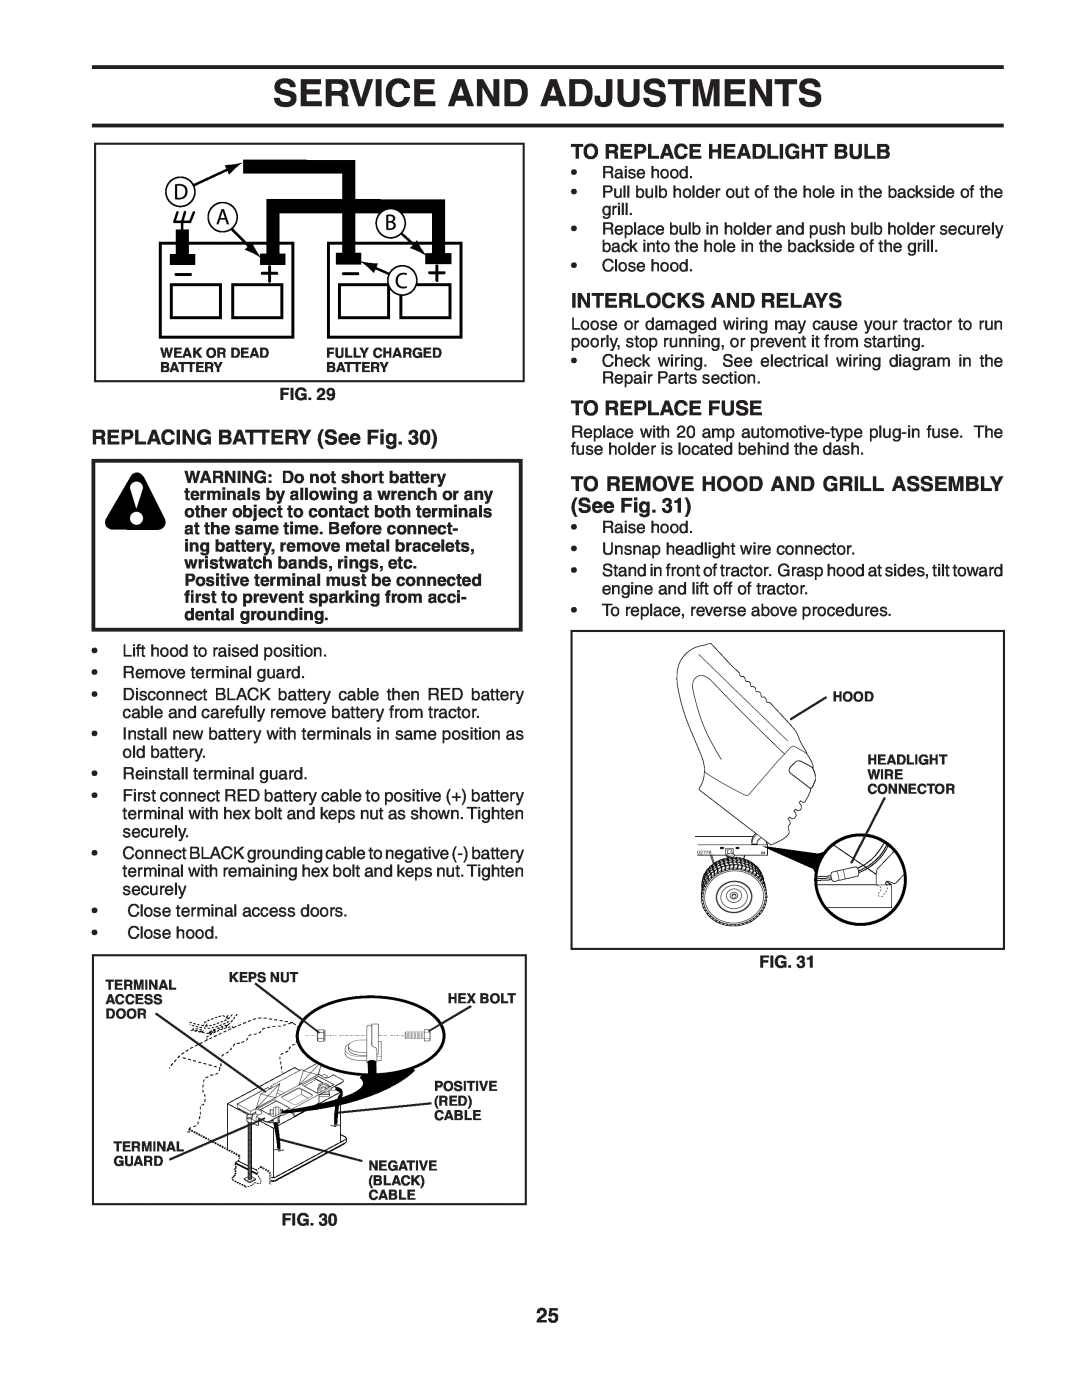 Husqvarna YTH2248 owner manual To Replace Headlight Bulb, Interlocks And Relays, REPLACING BATTERY See Fig, To Replace Fuse 